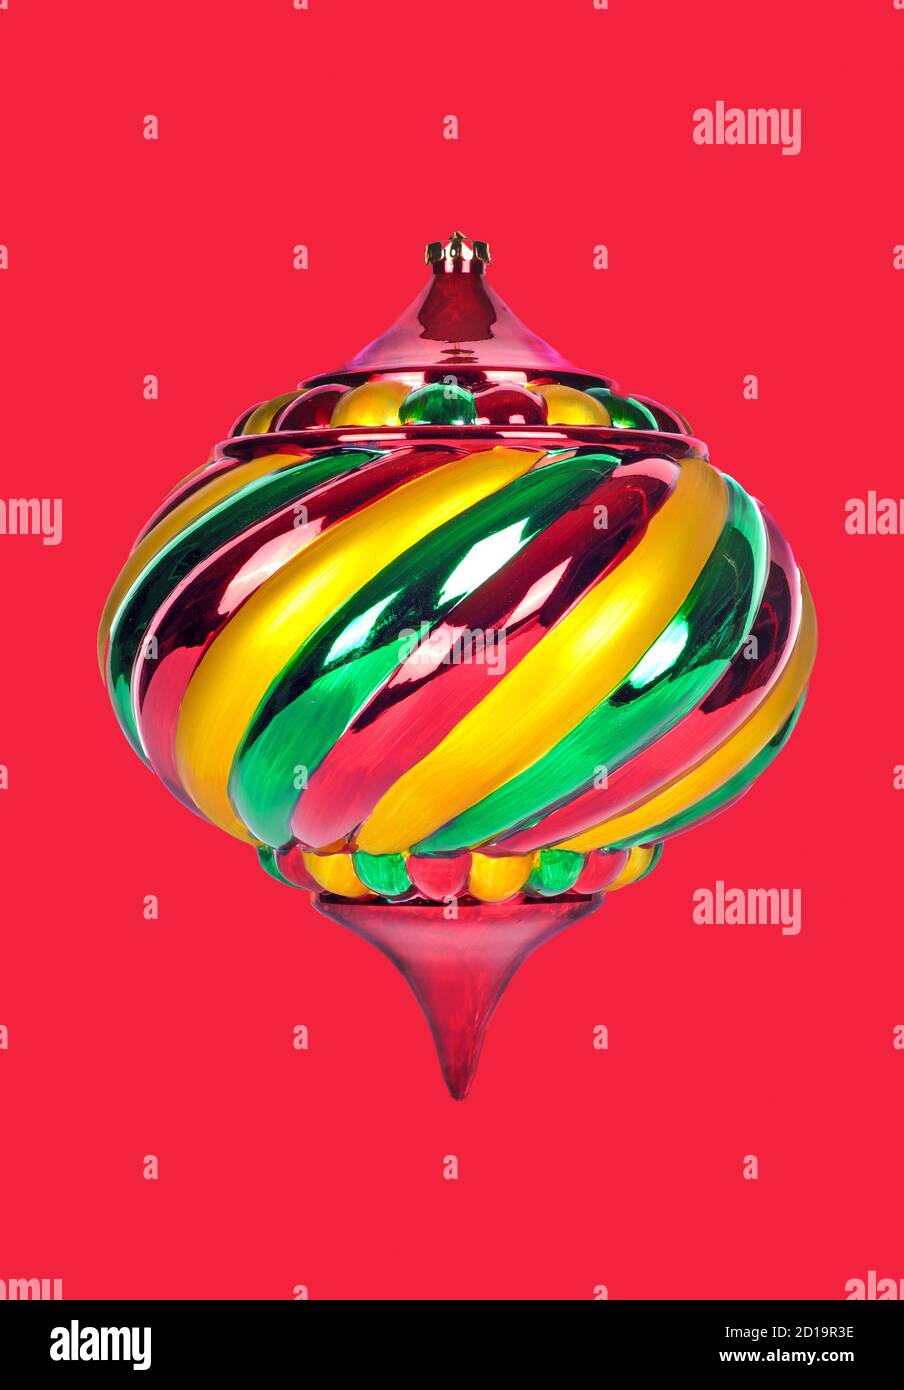 A Beautiful and Colorful Christmas Ornament Isolated on a Red Backgound Stock Photo